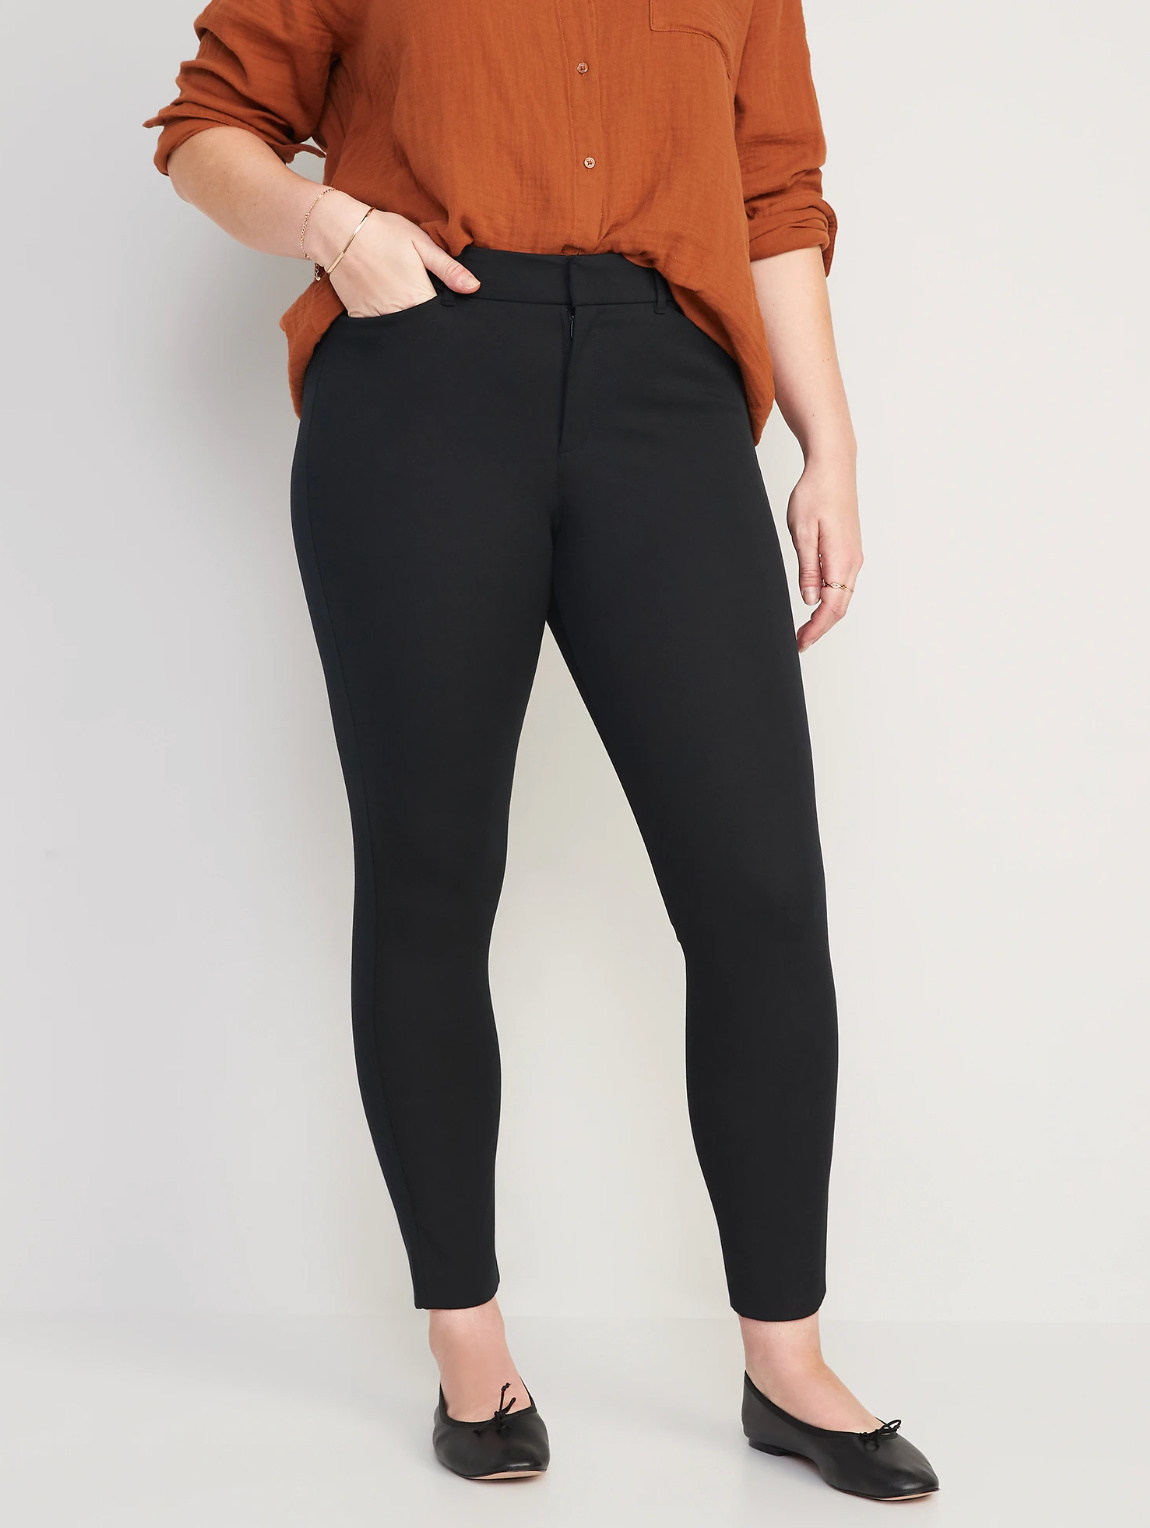 These are the Best Travel Pants for Women